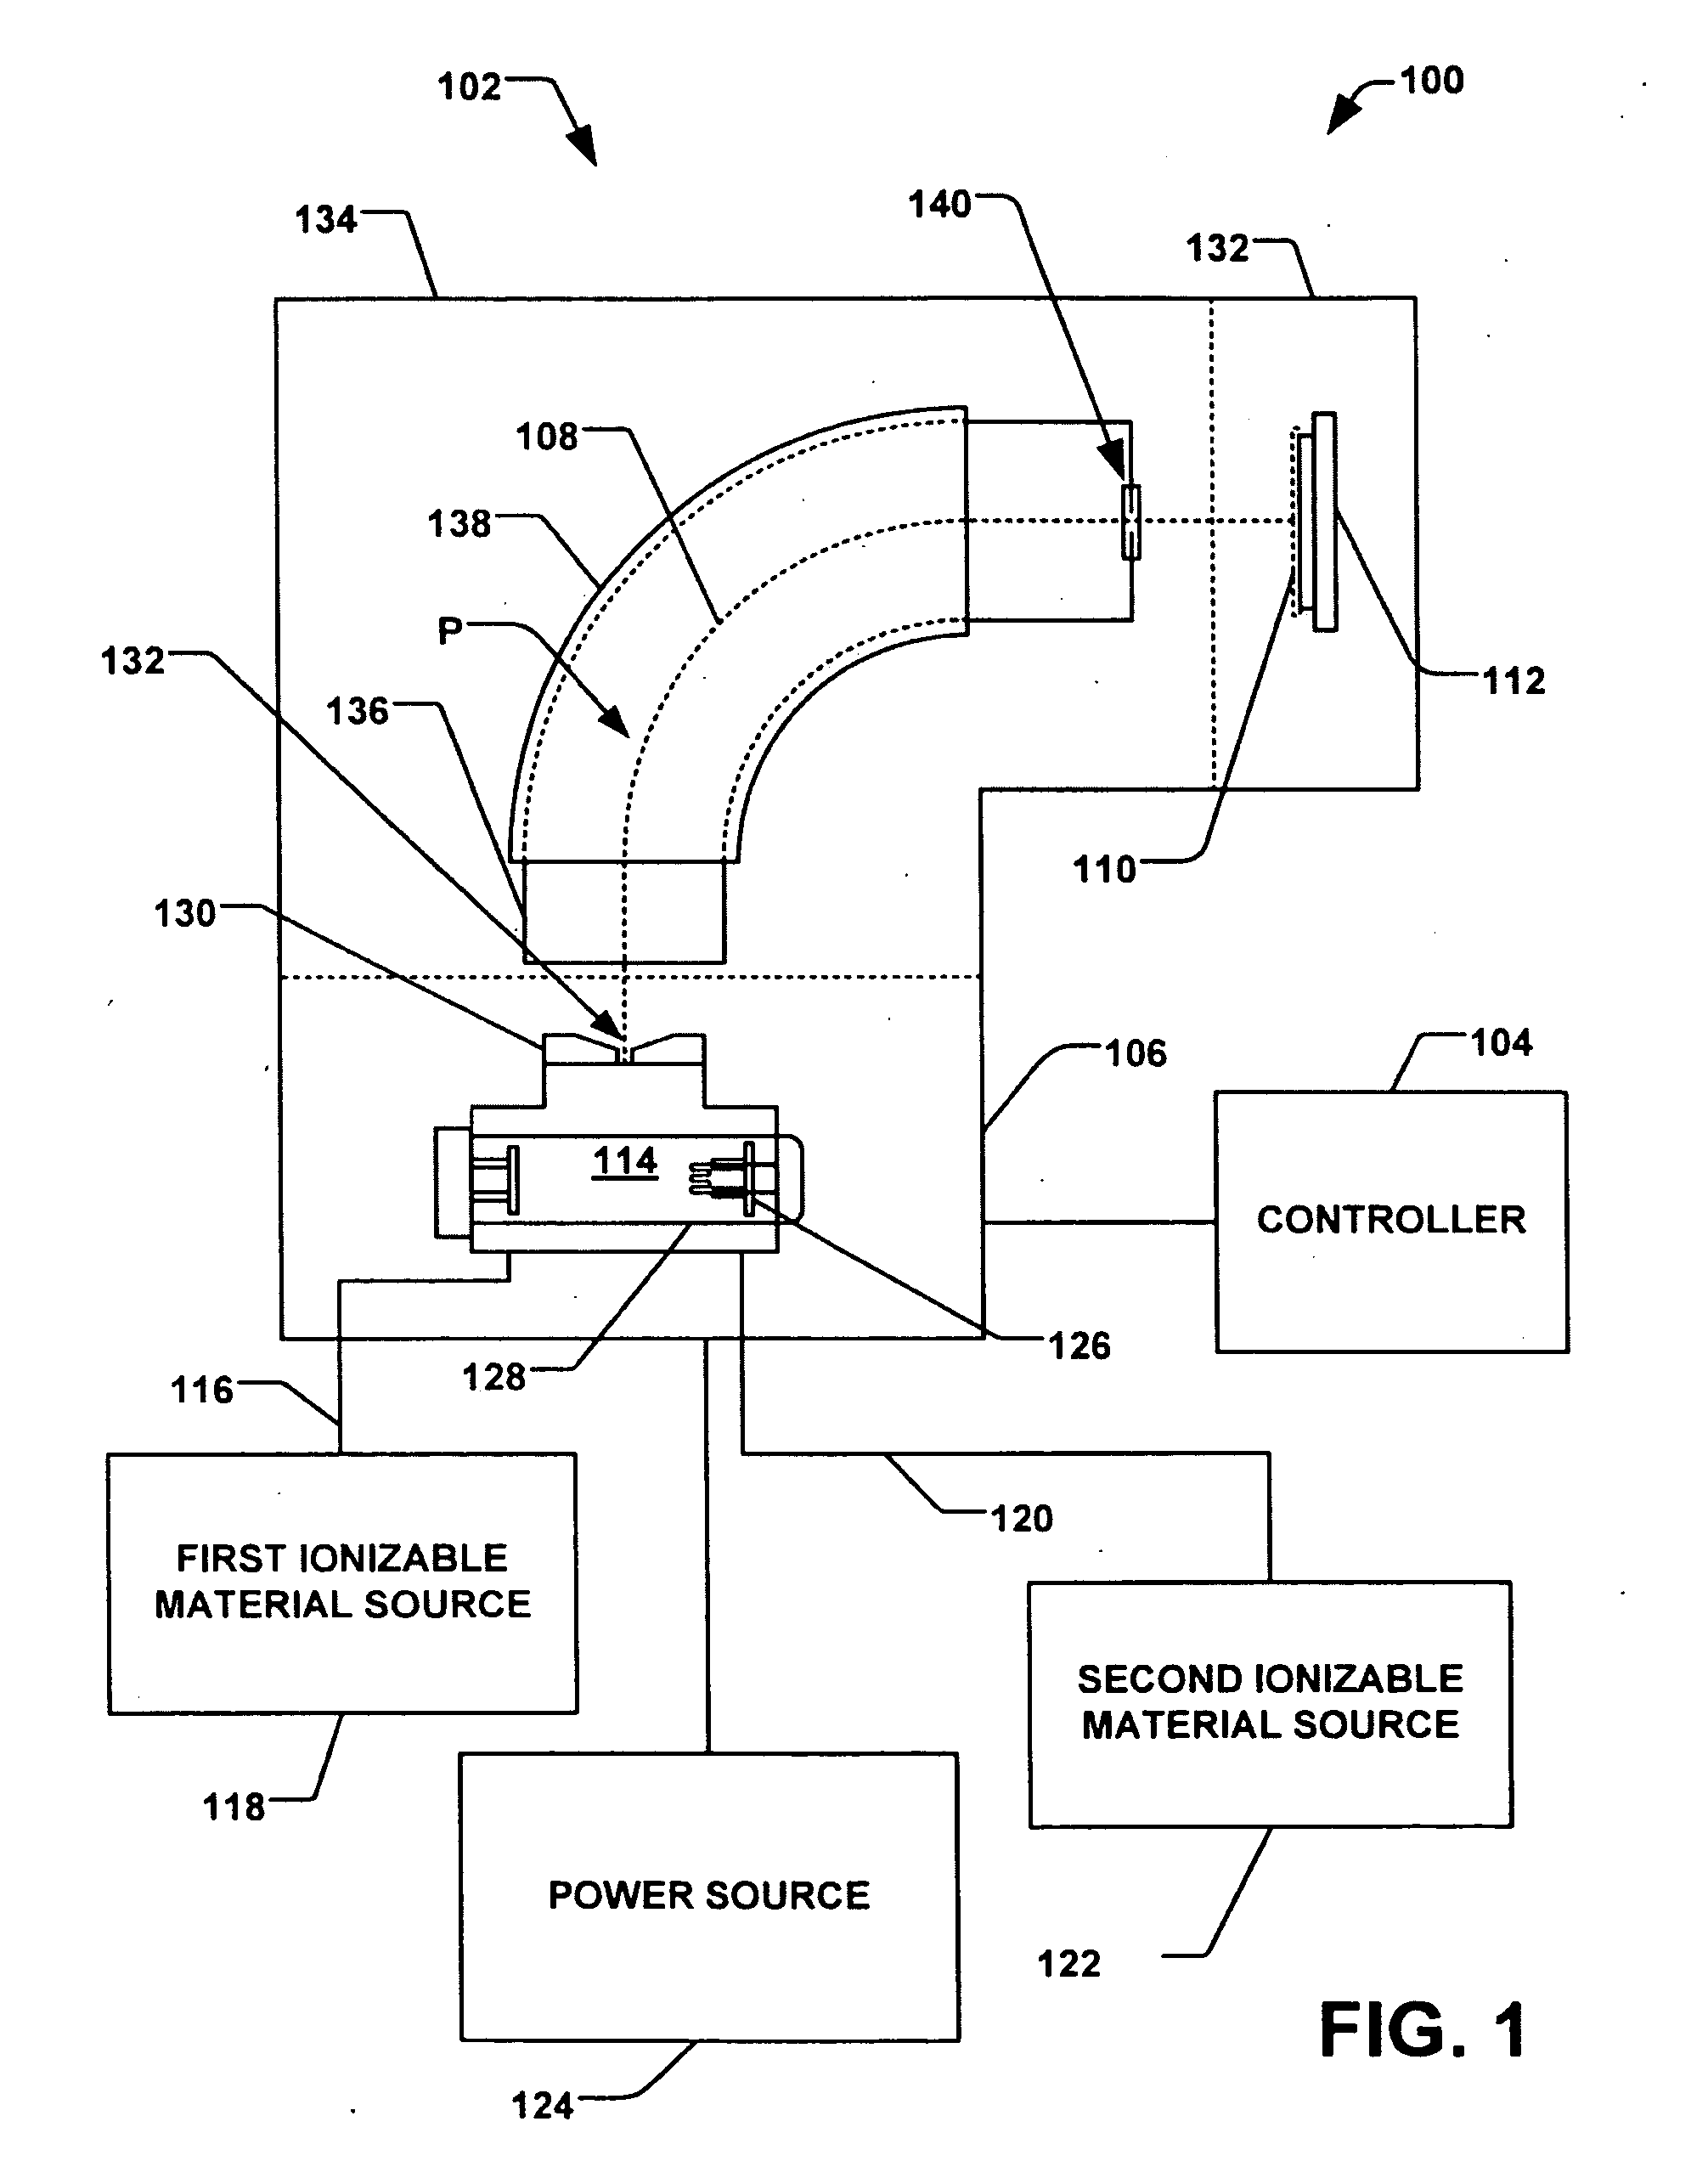 Hybrid ion source/multimode ion source